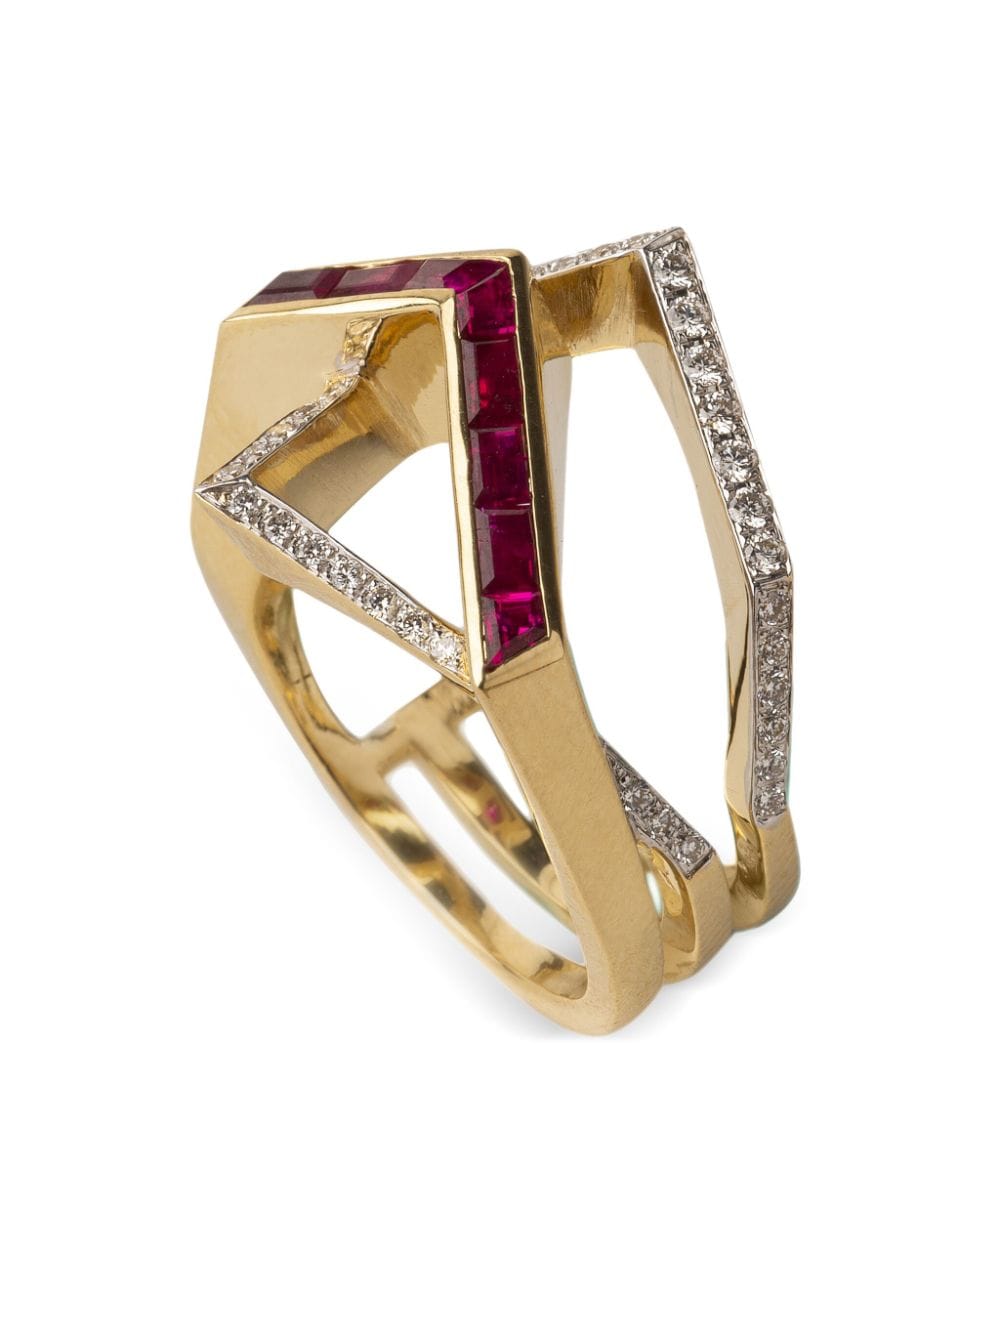 Image 1 of Gaelle Khouri 18kt yellow gold Figure Particulière diamond and ruby ring